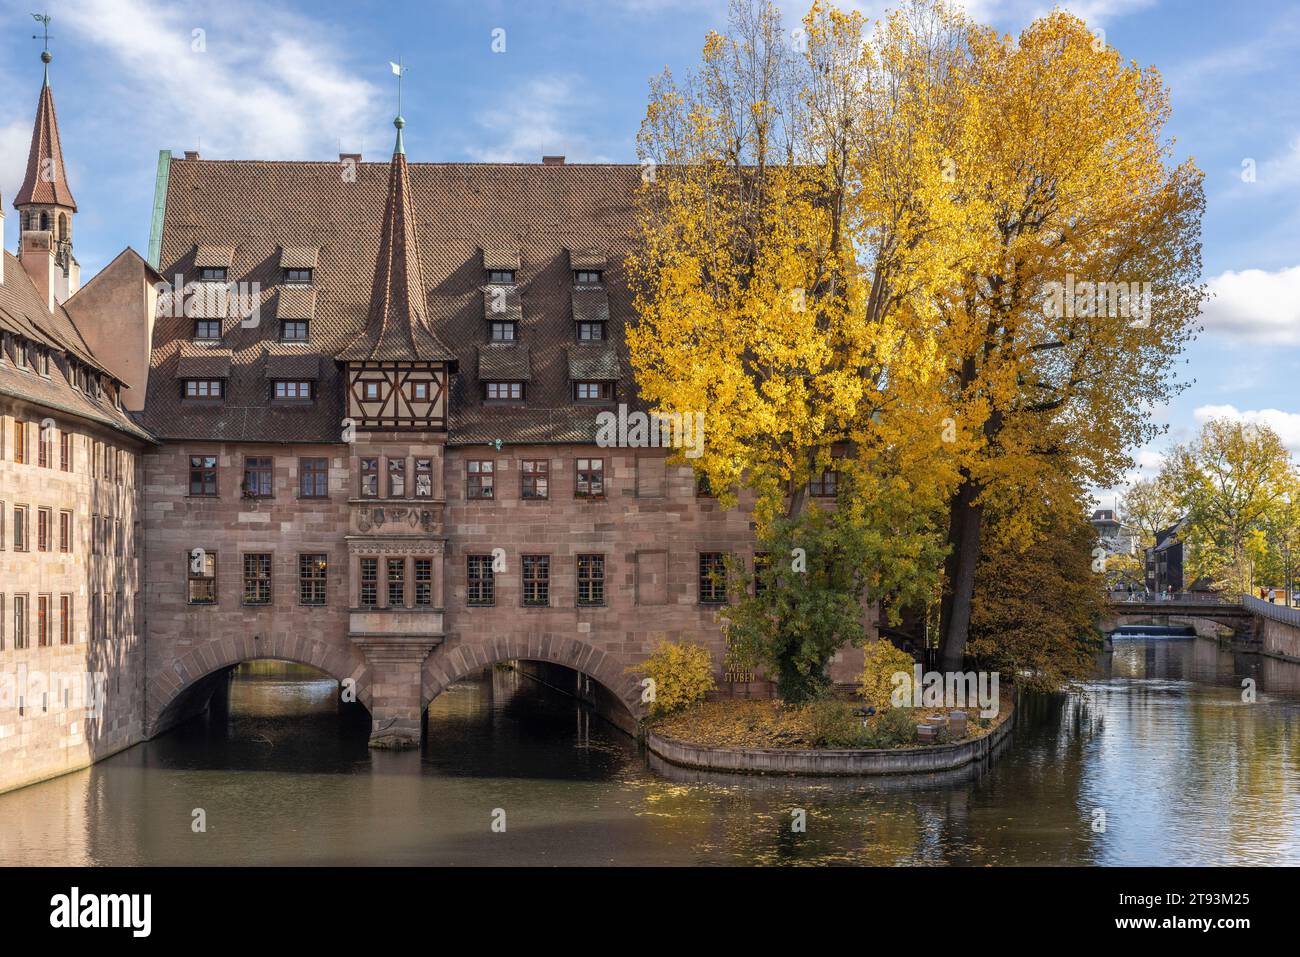 Heilig-Geist-Spital (Holy Spirit Hospital) and Pegnitz River from Museumbrucke, Old Town, Nuremberg, Germany Stock Photo